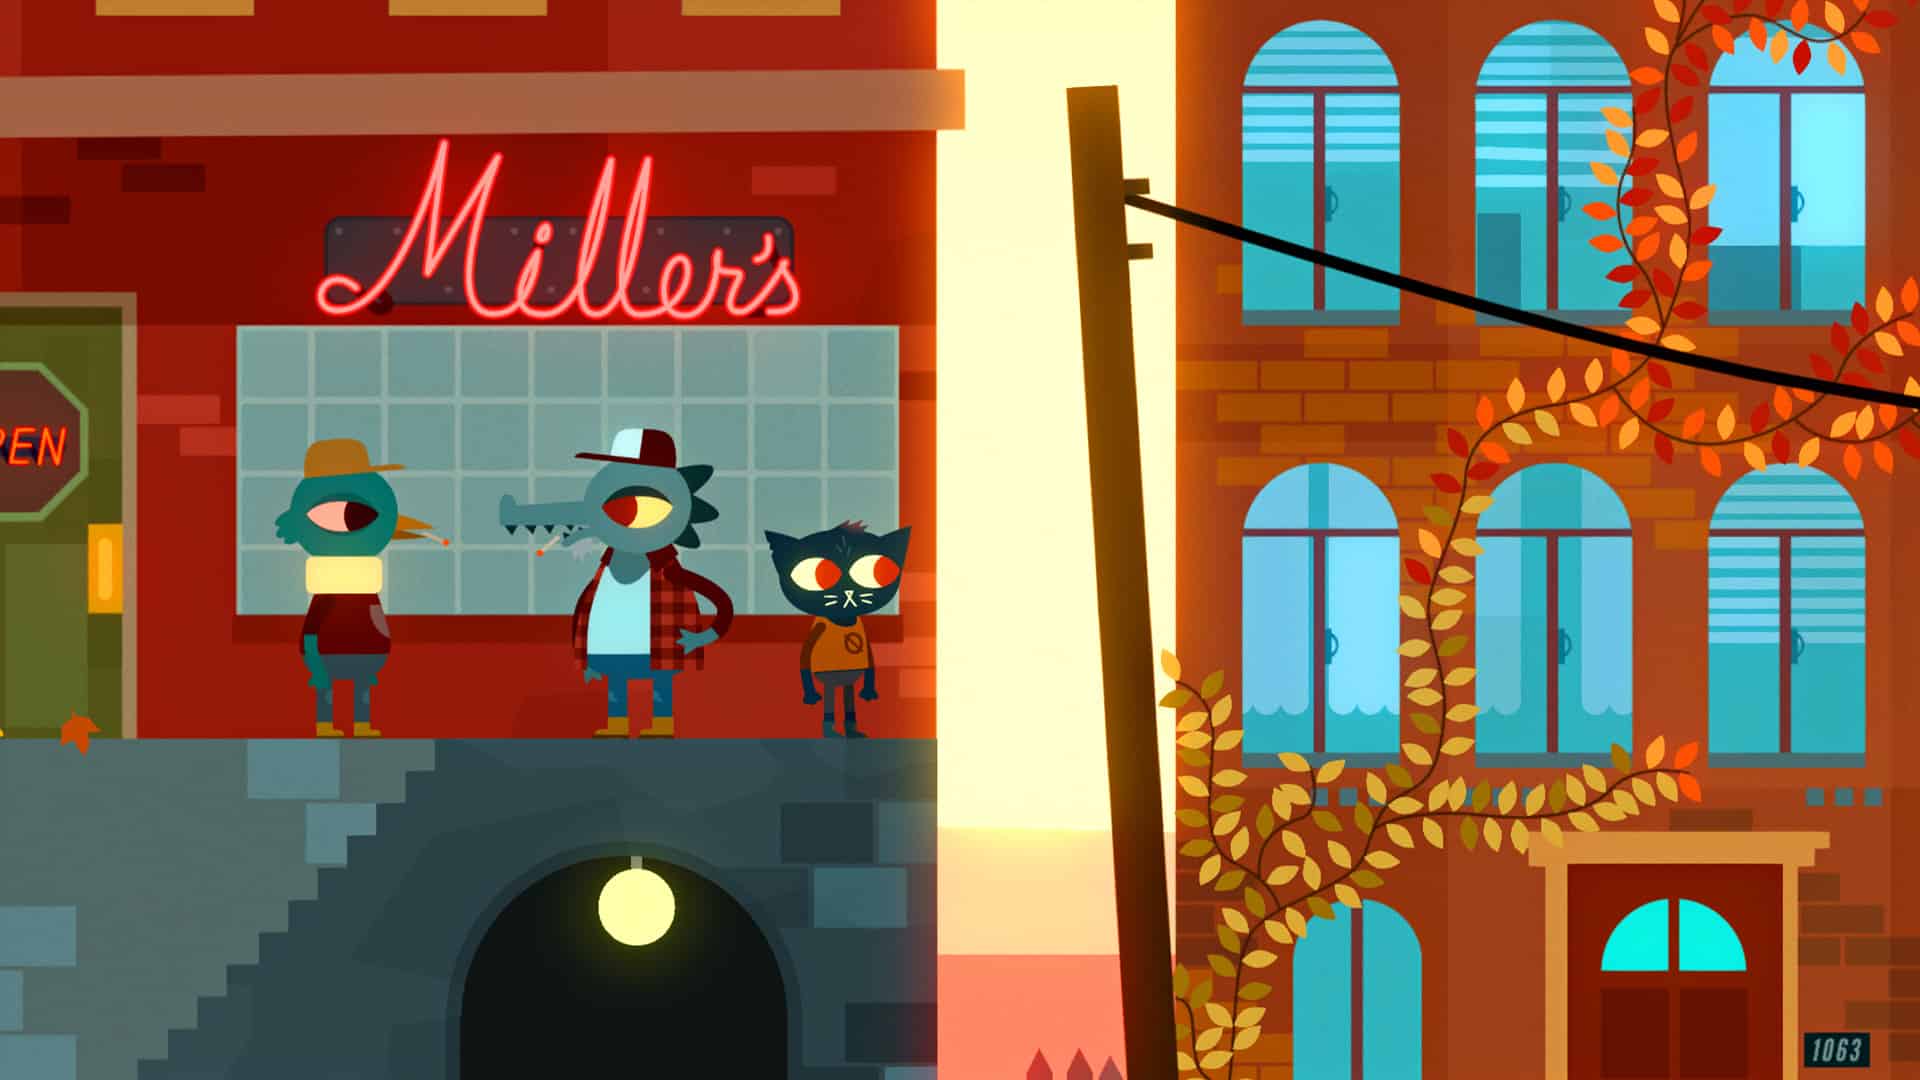 A Steam promotional image for Night in the Woods.